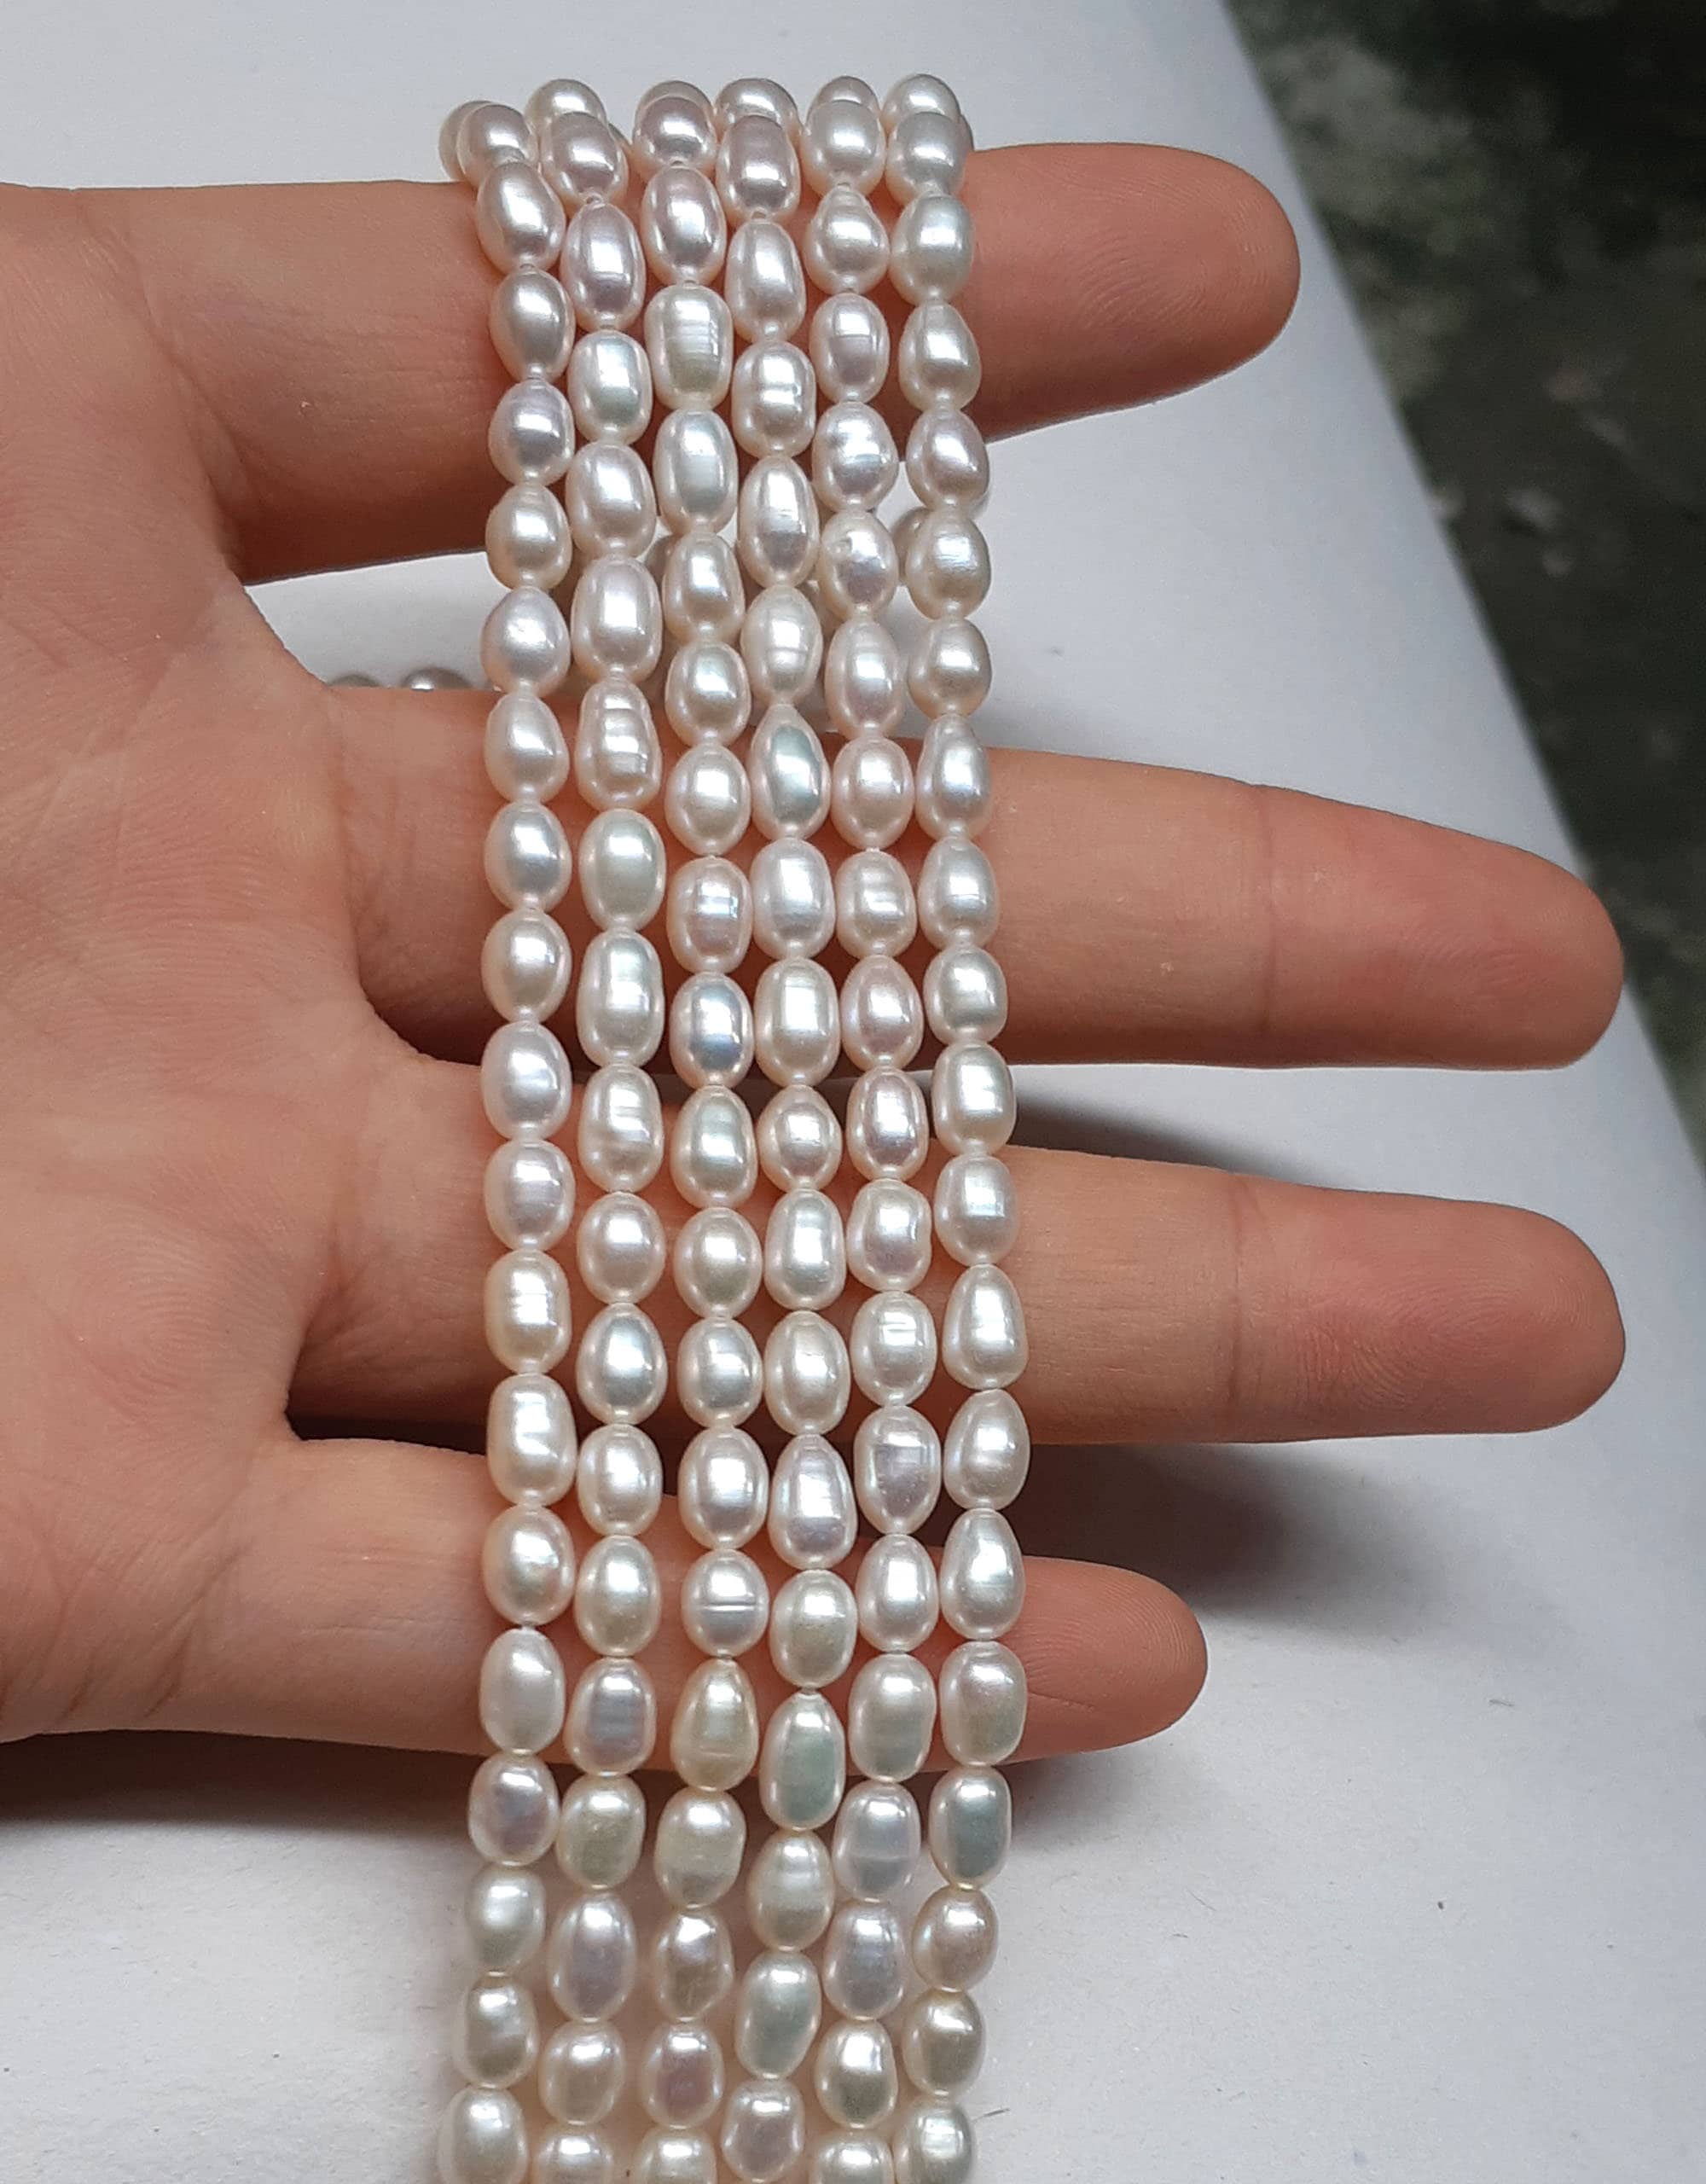 AA+ 4-4.5mm, 4.5-5mm round pearls, lustrous loose pearl beads, natural  color white, freshwater half drilled pearls, good luster, FLR4050-W